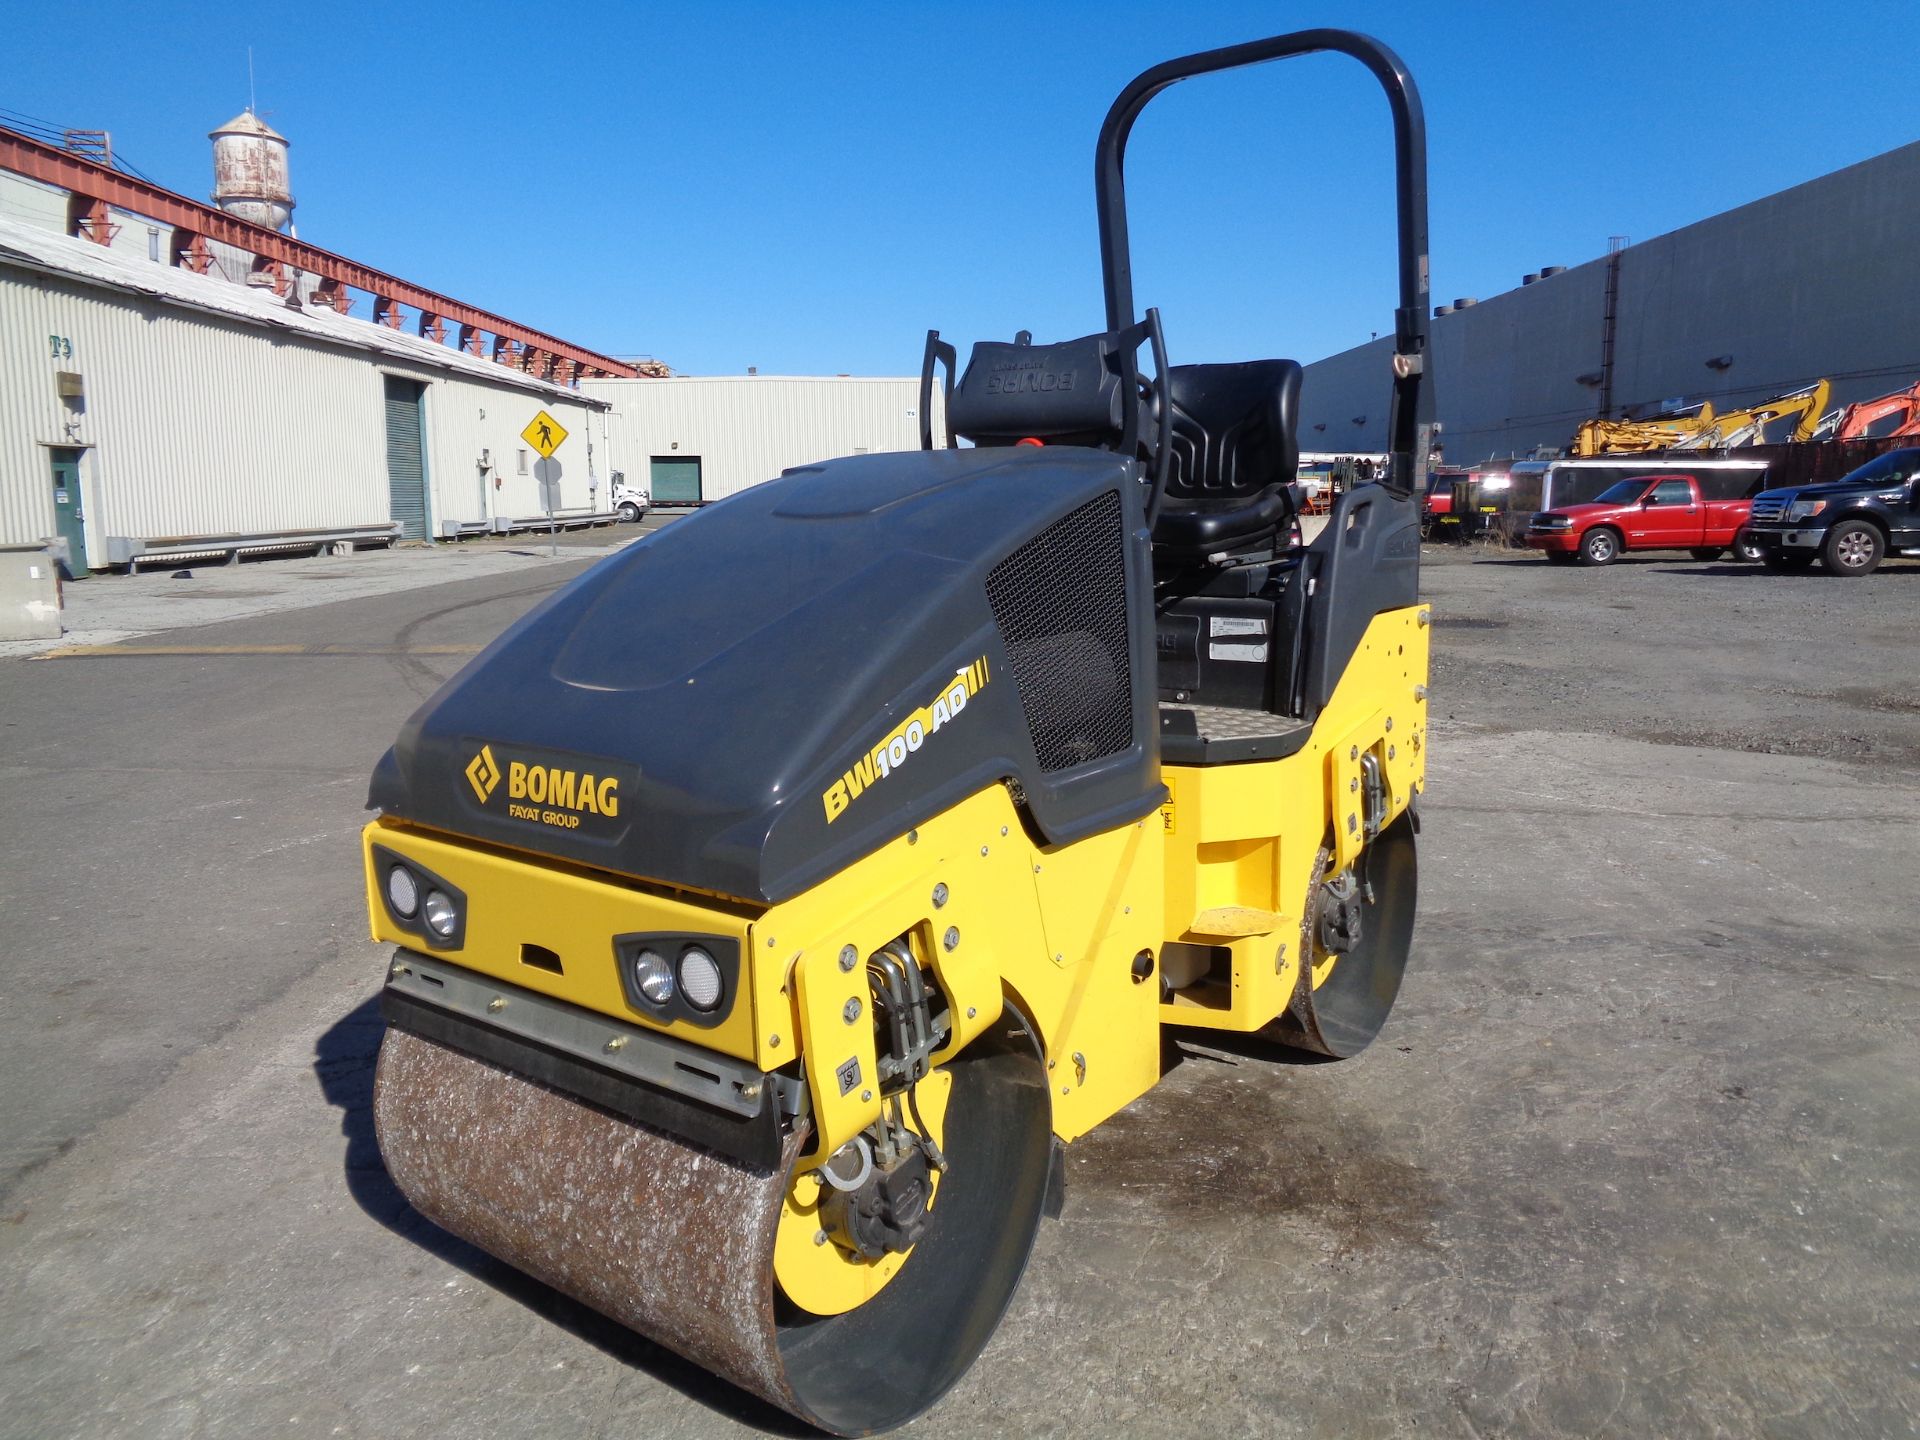 UNUSED 2022 Bomag BW100 AD-5 Drum Roller - Lester, PA - Image 2 of 8